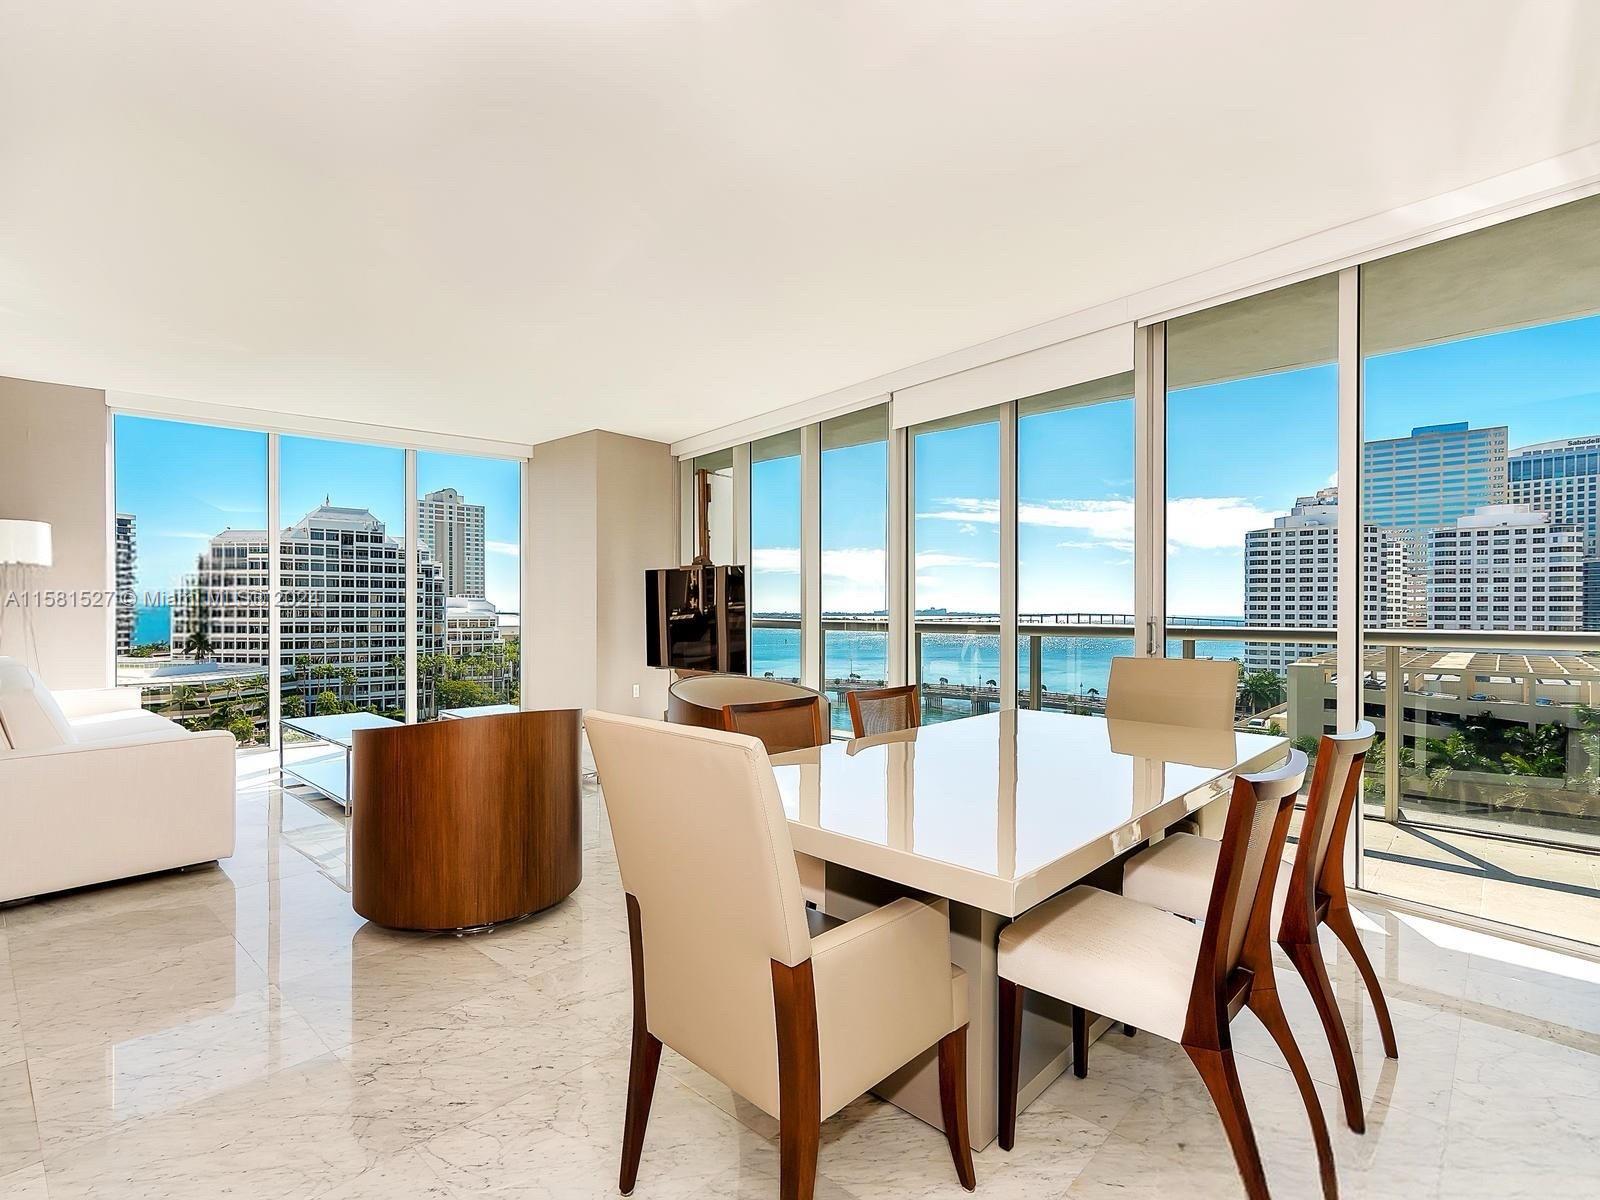 Stunning, 3 Bedroom South East Corner Unit in the coveted 01 Line of Icon Brickell Tower II with panoramic waterfront views of Biscayne Bay as far as the eye can see.   Enjoy nearly 1,800 sq. ft. of luxury with water views from nearly every room, and the oversized balcony overlooking the Bay.  Designed by the renowned Phillipe Starck, this tastefully appointed condo features an open floor plan with a waterfront living room that is pefect for entertaining, or relaxing, and enjoy the convenience of your assigned parking space on the same floor as your apartment.  Amenities include the 300,000 gallon waterfront rooftop pool, 5 star spa, gym, 4 restaurants (including Cipriani), and walking distance to the best shopping and dining in Brickell, all while just 15 min to the beach and airport.